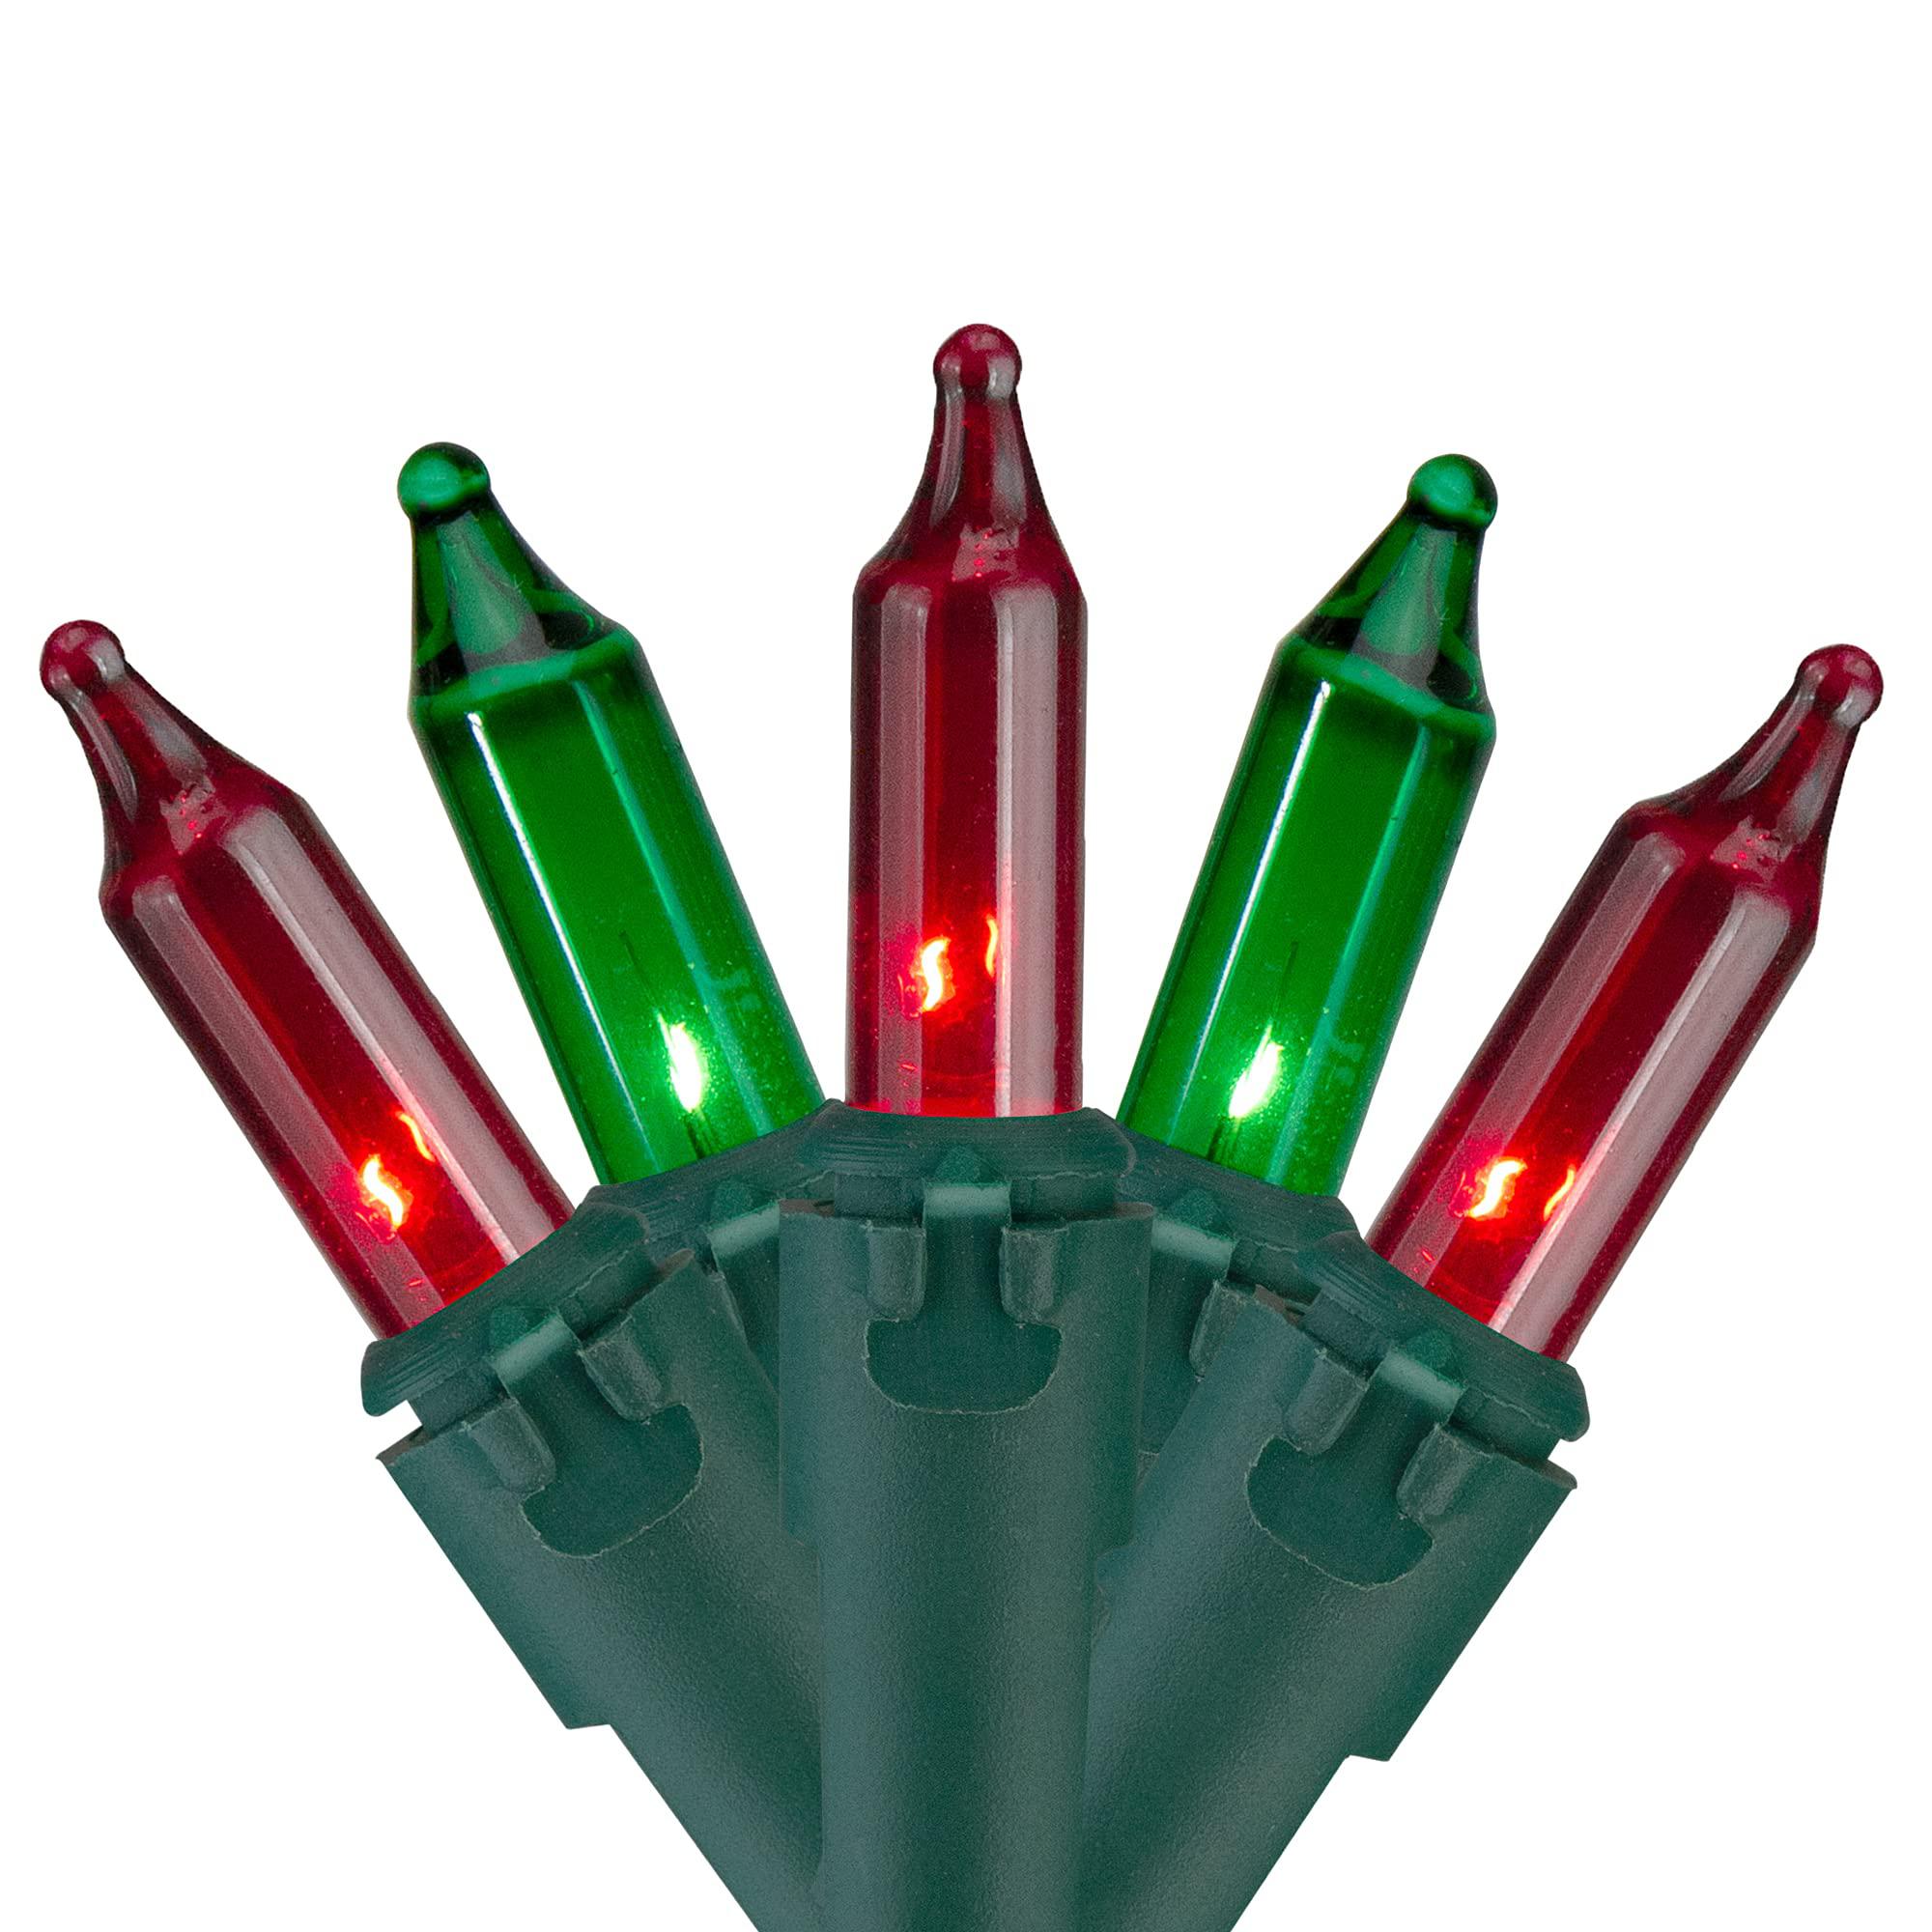 northlight 100 count red and green mini christmas lights - 28.8 ft green wire